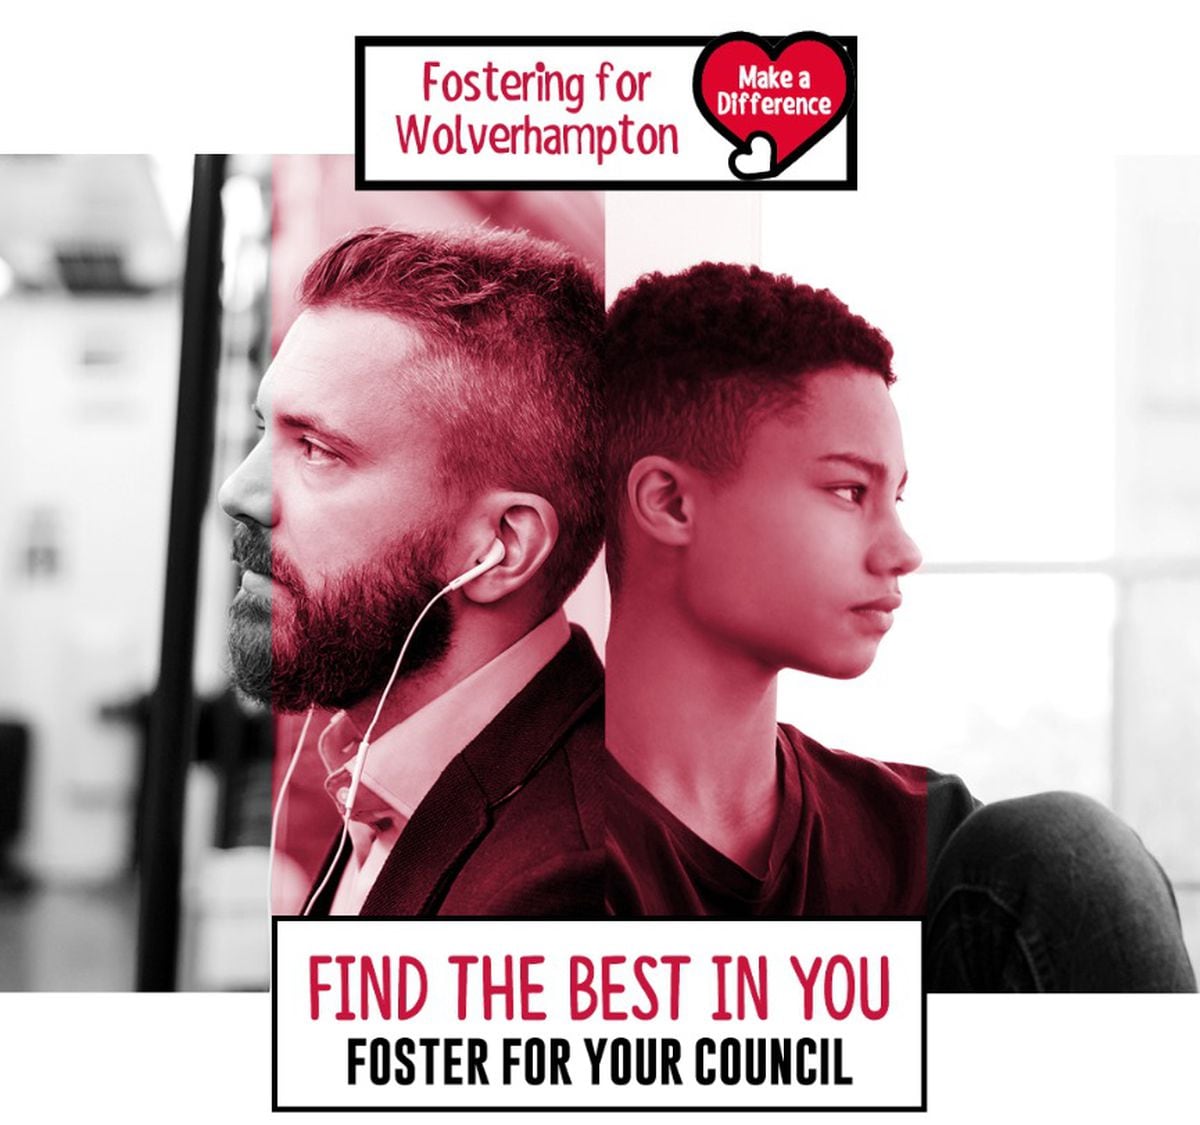 Find the best in you, foster for your council